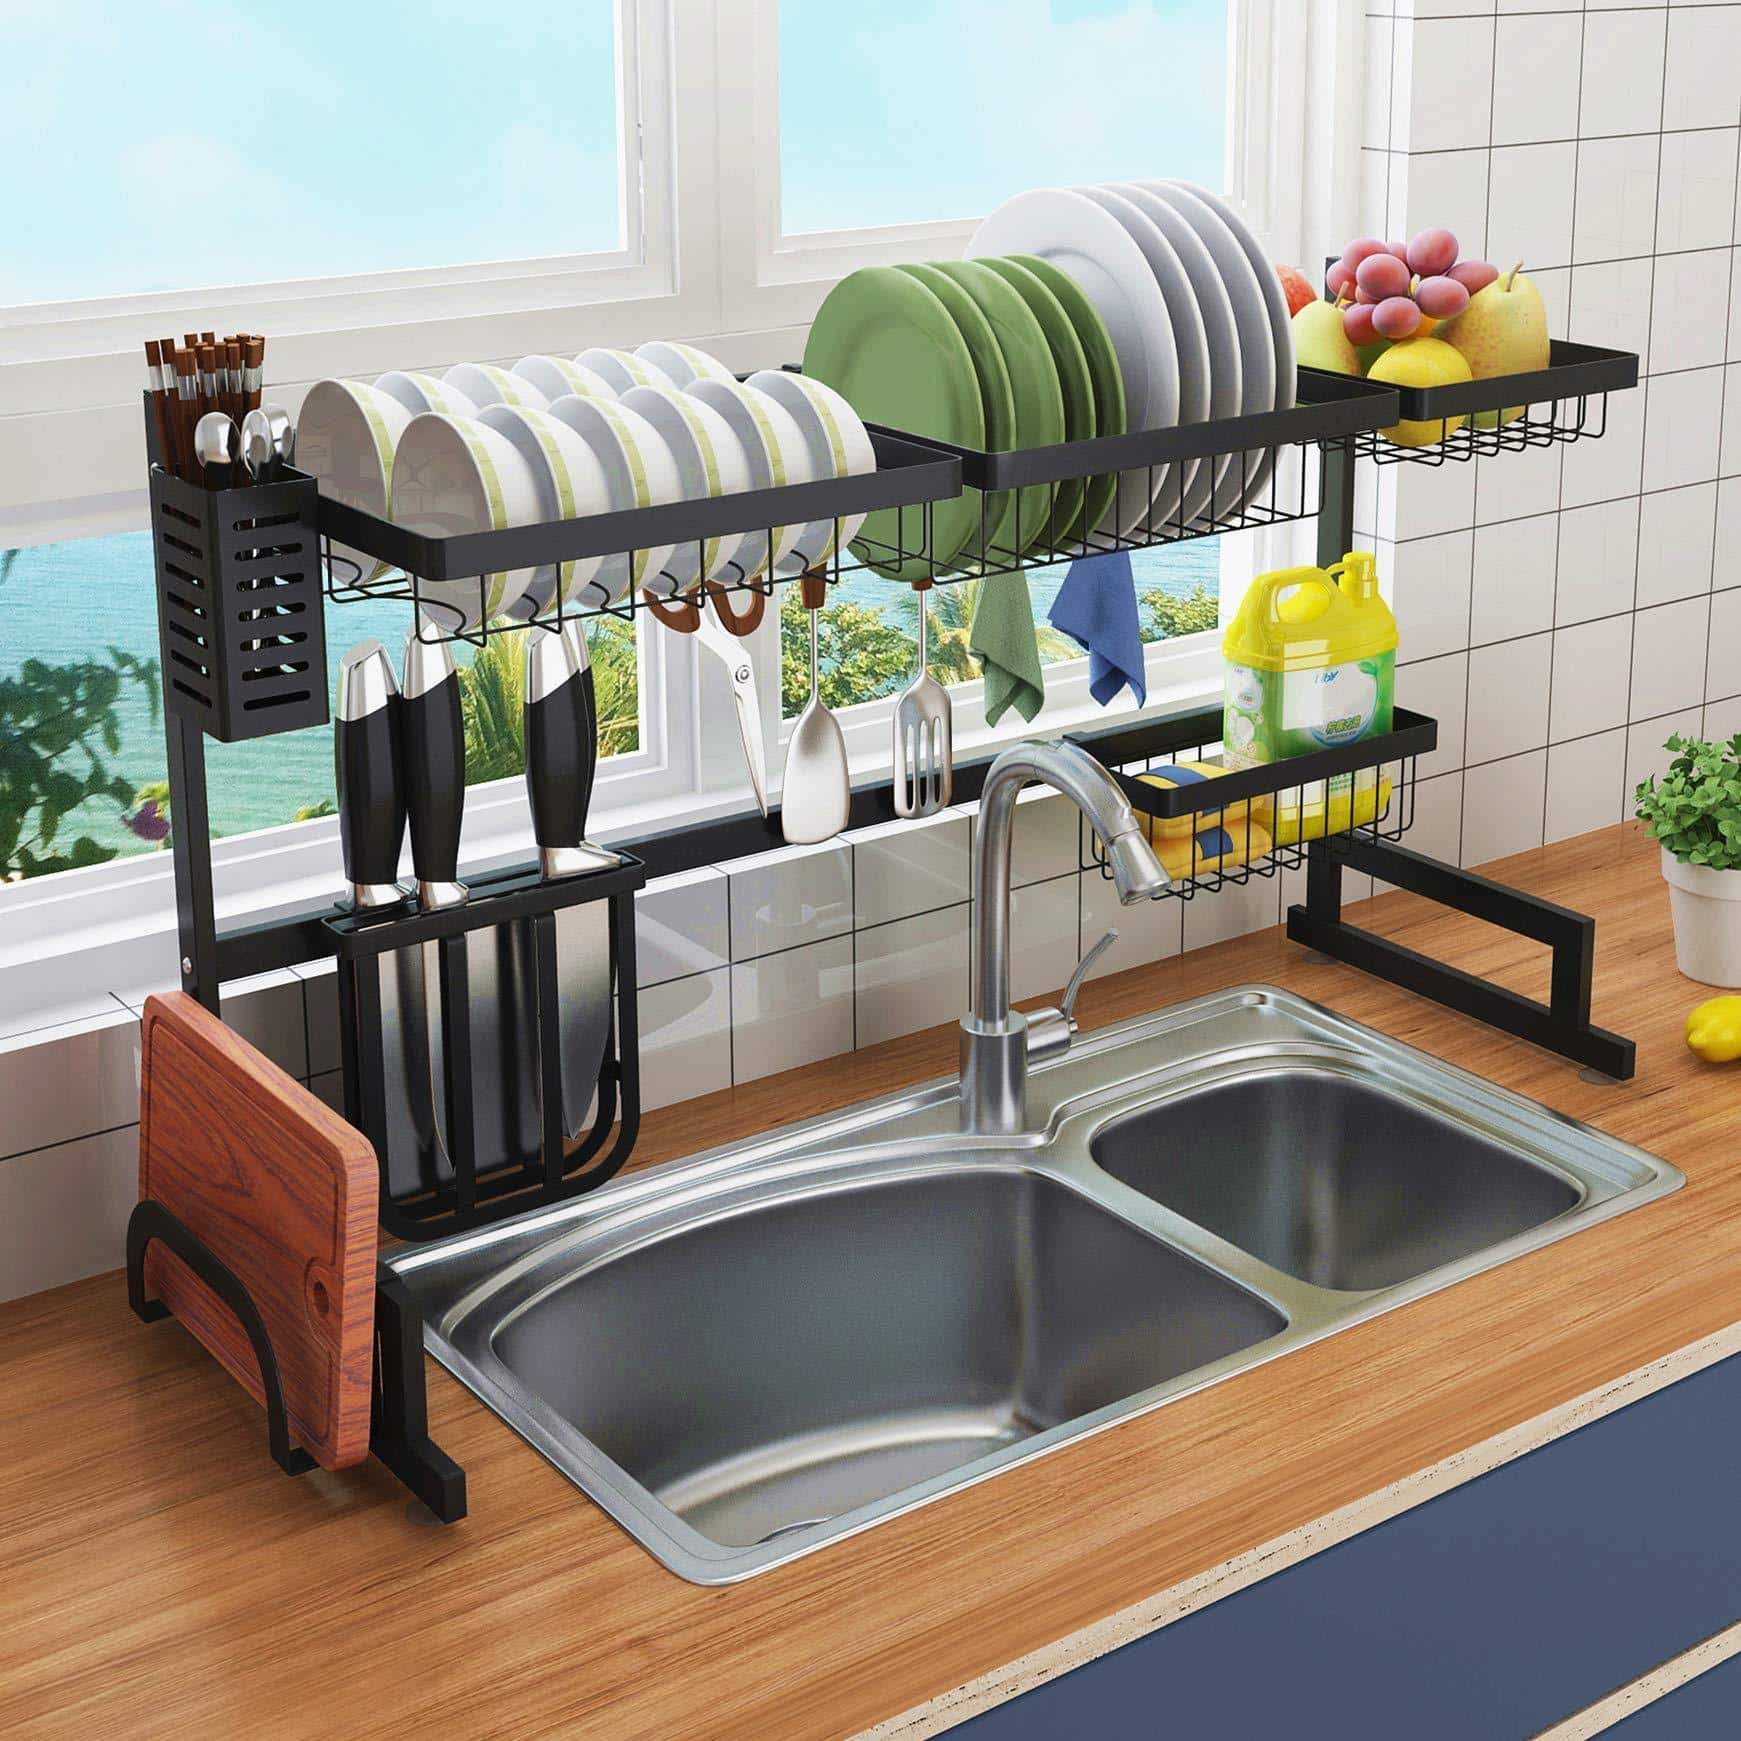 Kitchen over the sink dish drying rack 2 tier large 18 8 stainless steel drainer display shelf kitchen supplies storage accessories countertop space saver stand tableware organizer with utensil holder